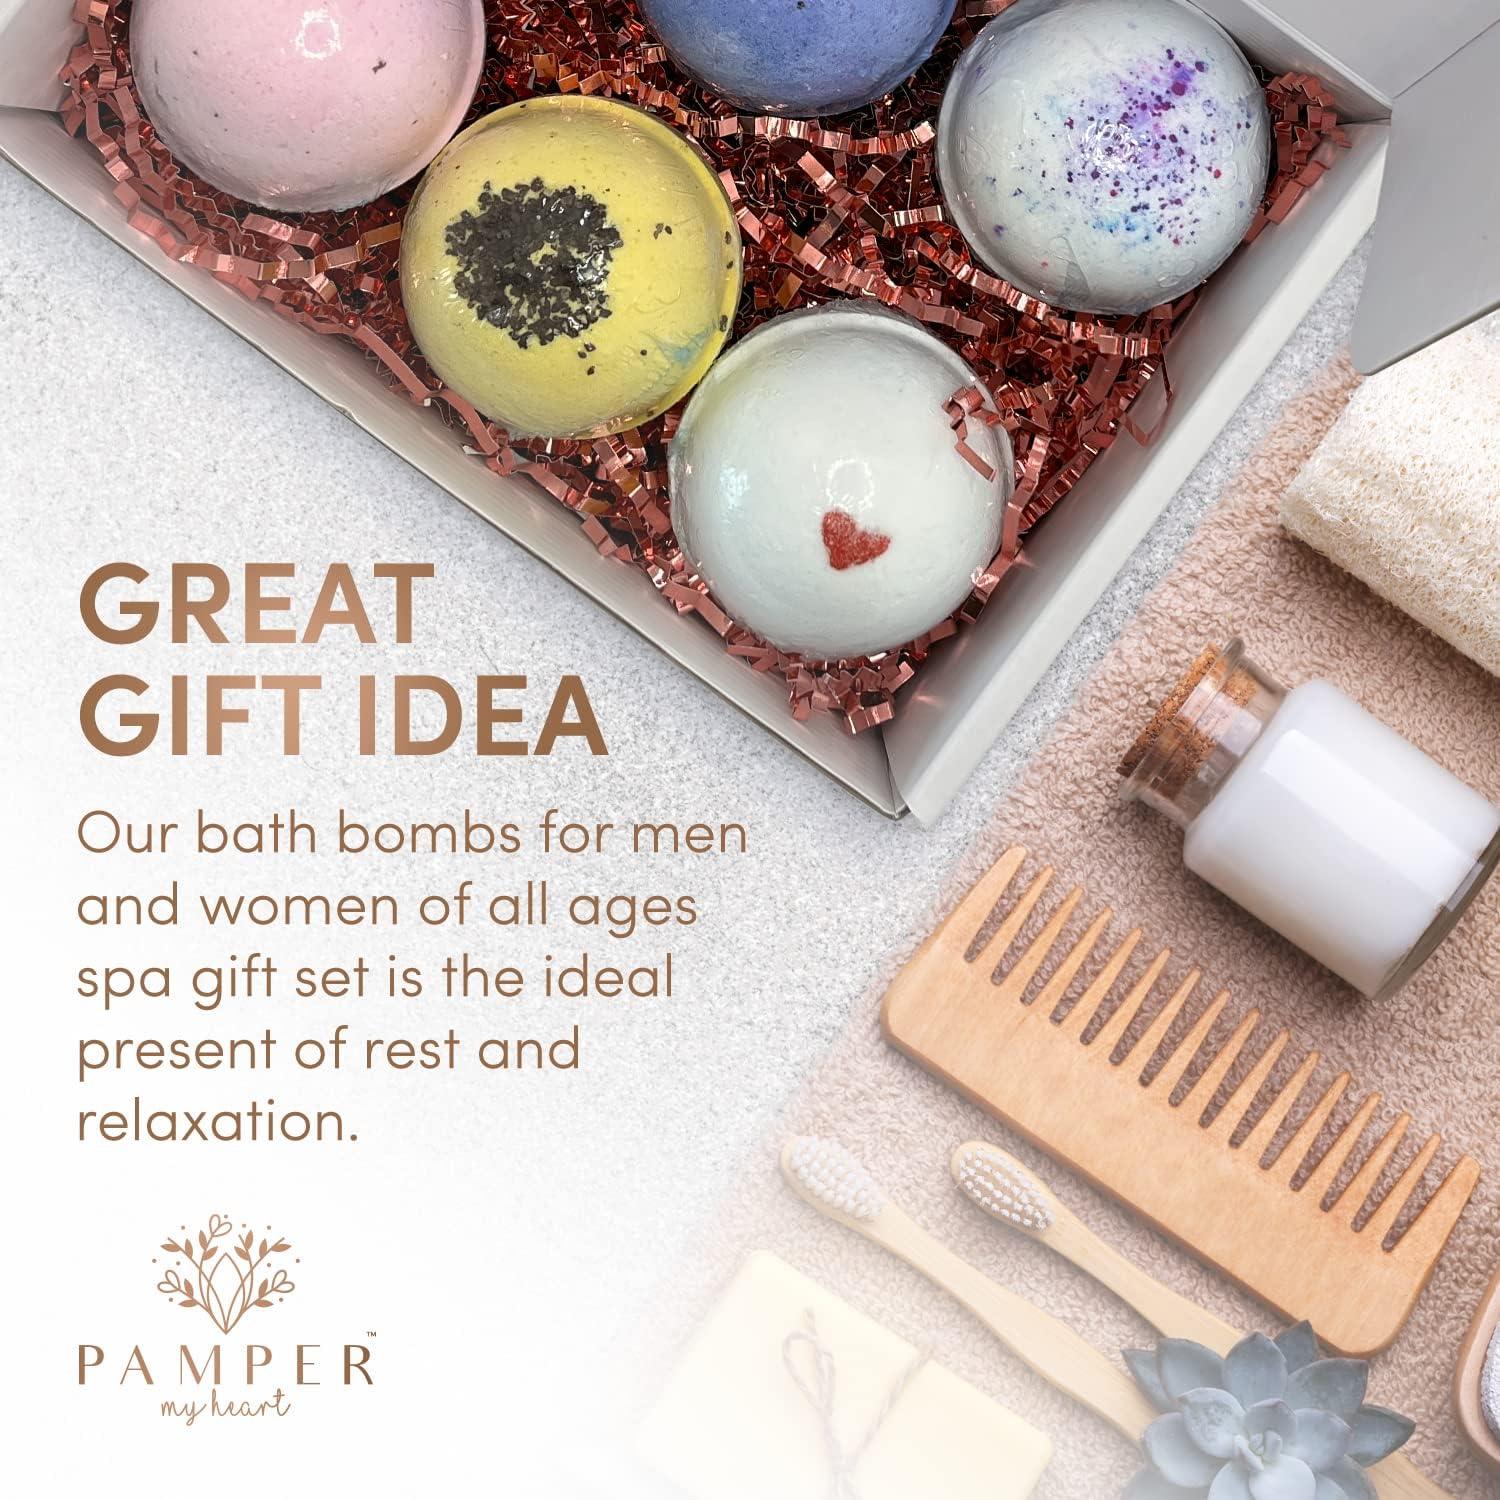 Top Bath Gifts for Women: Luxury Relaxation Gift Ideas